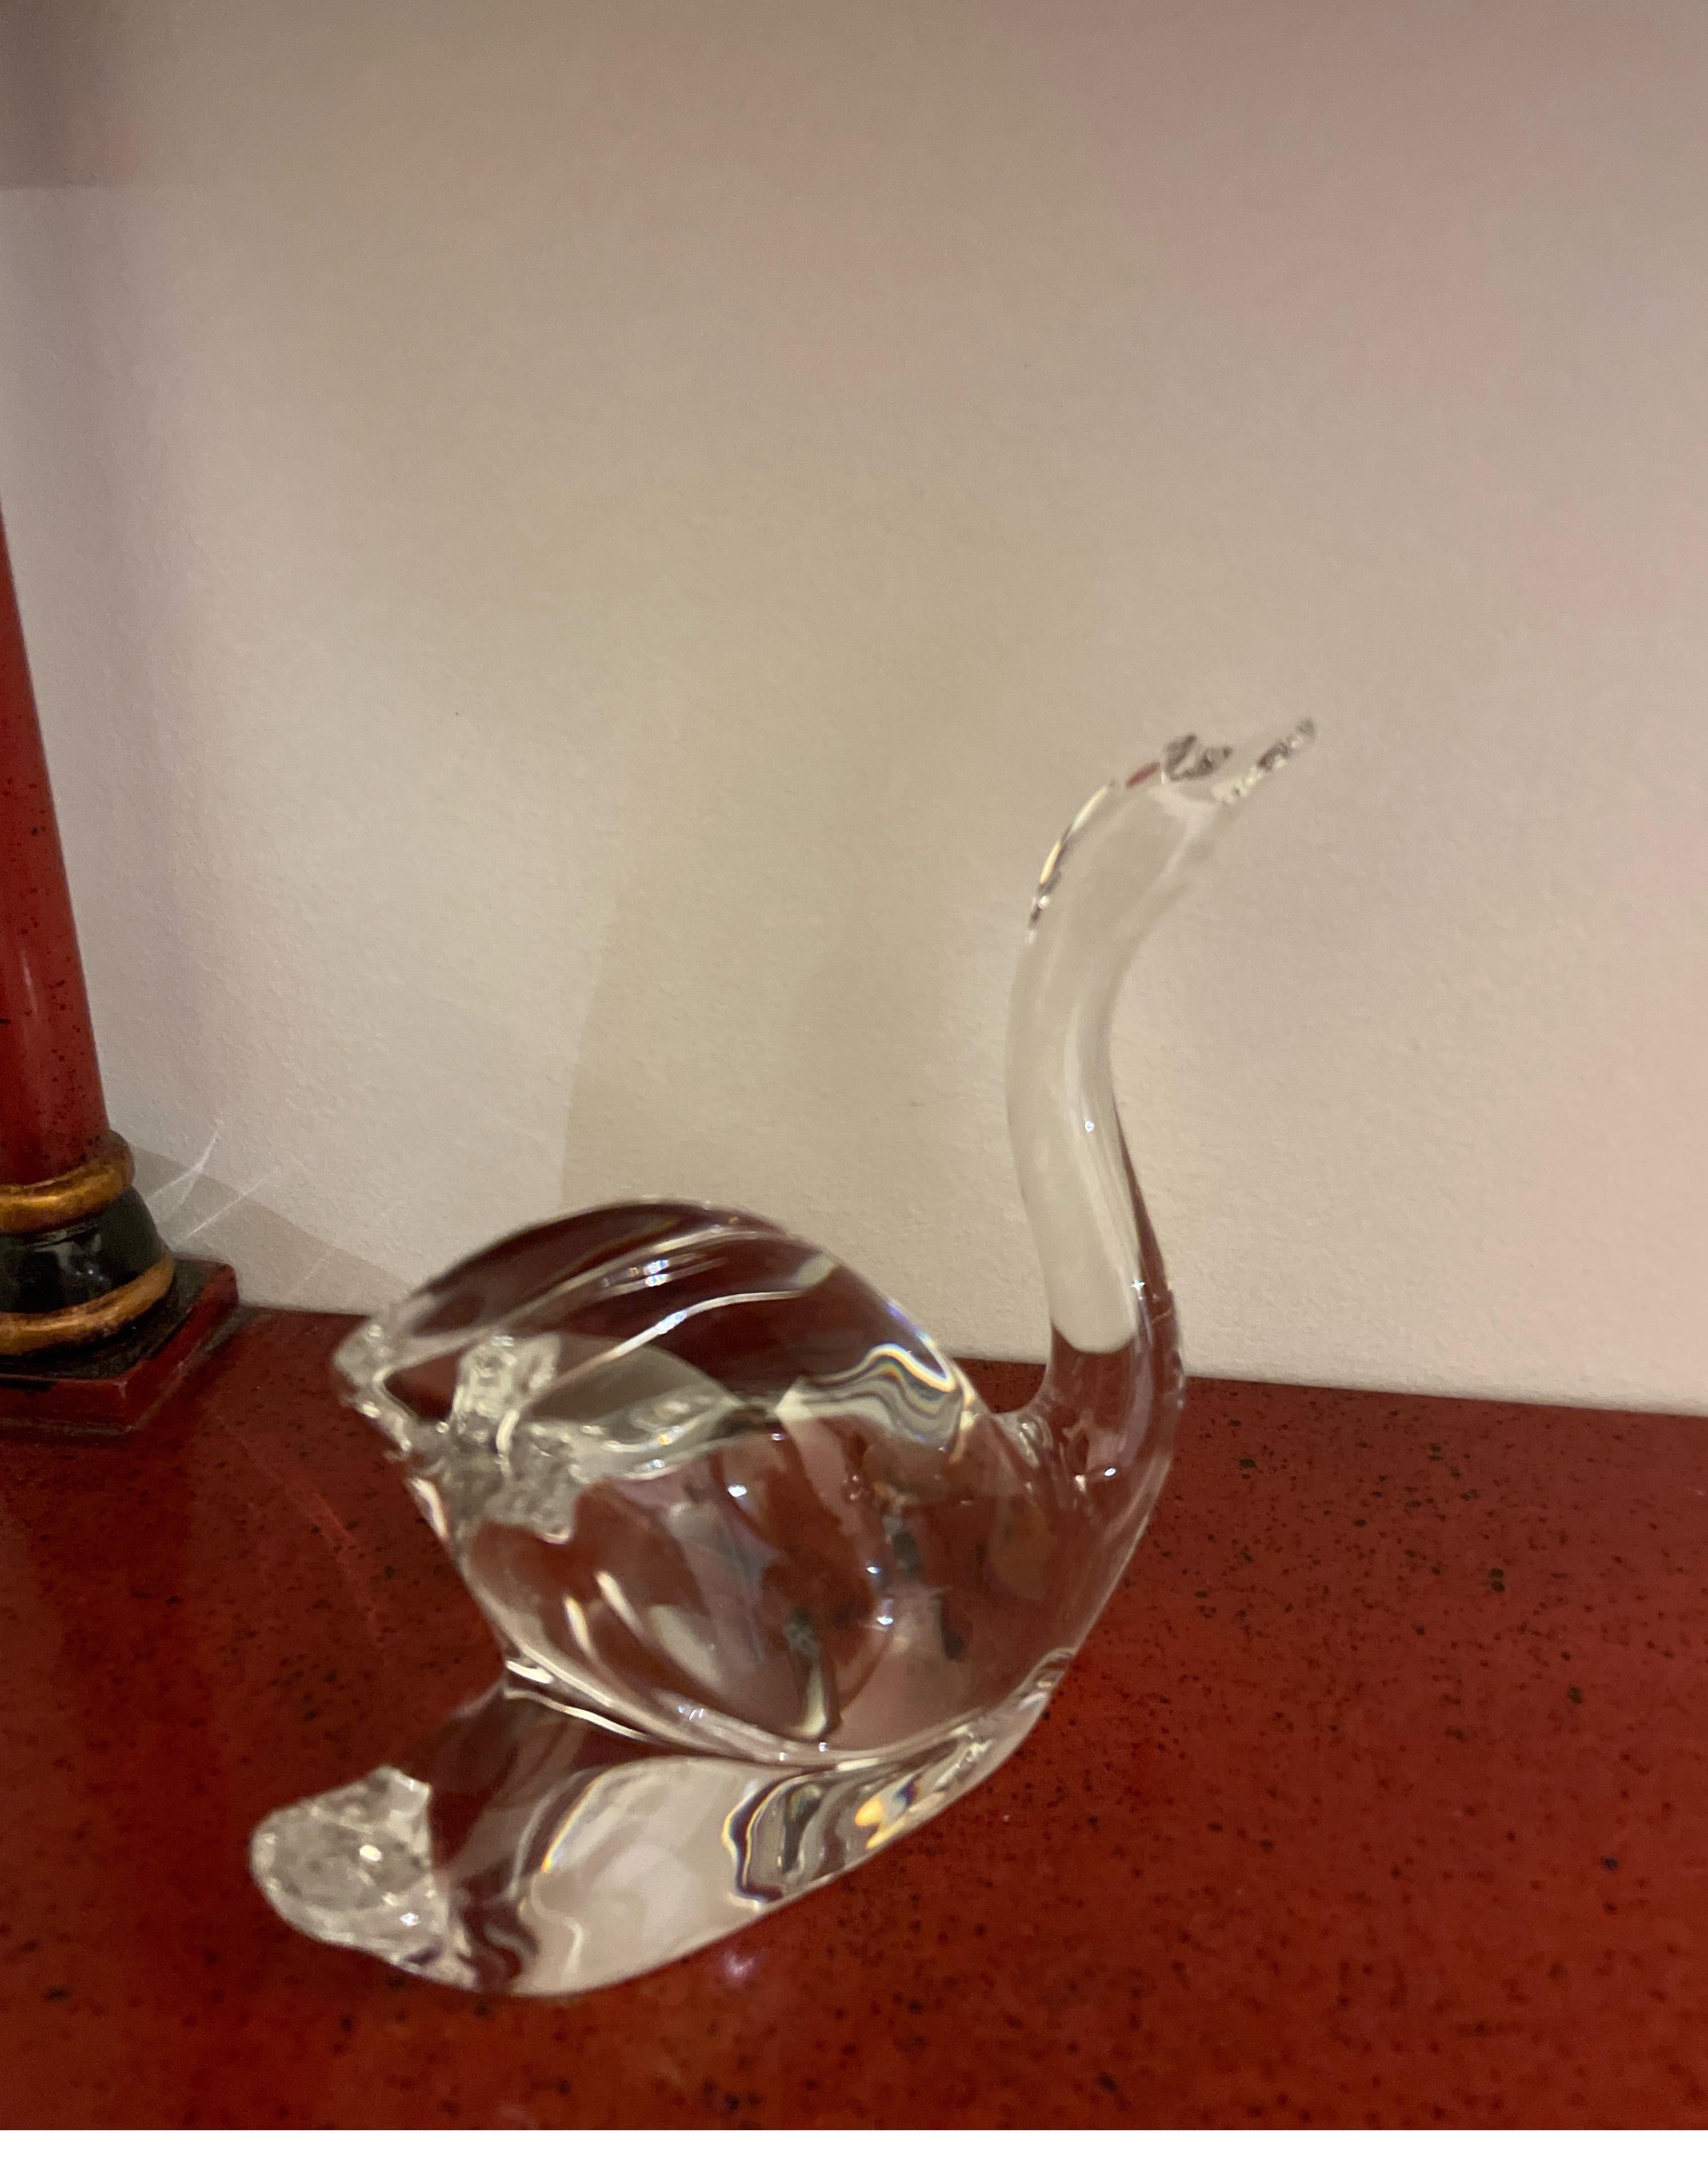 Baccarat crystal swan figurine with head up. A lovely addition to any collection. A perfect little paperweight.